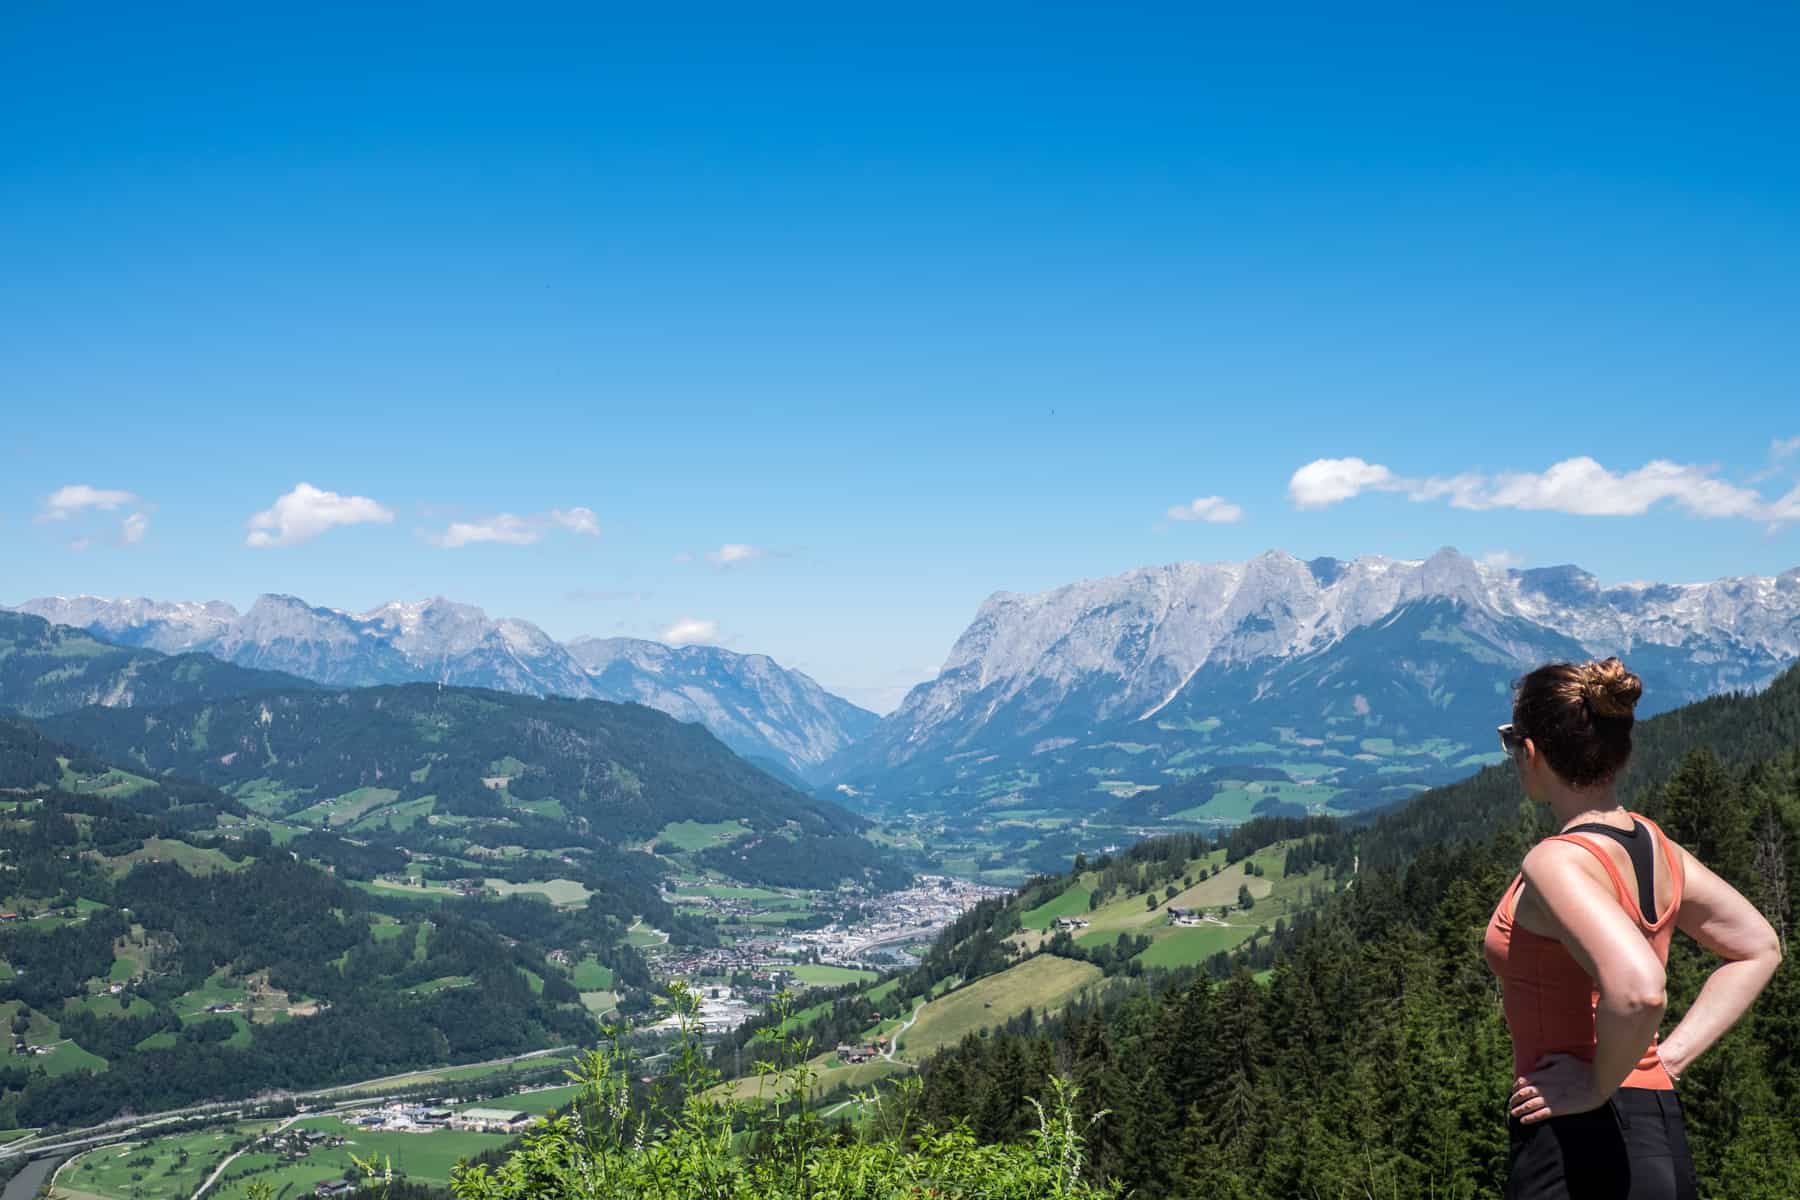 A woman in an orange vest looks out over a green valley filled with St. Johann im Pongau city, thats backed by flat-top mountains